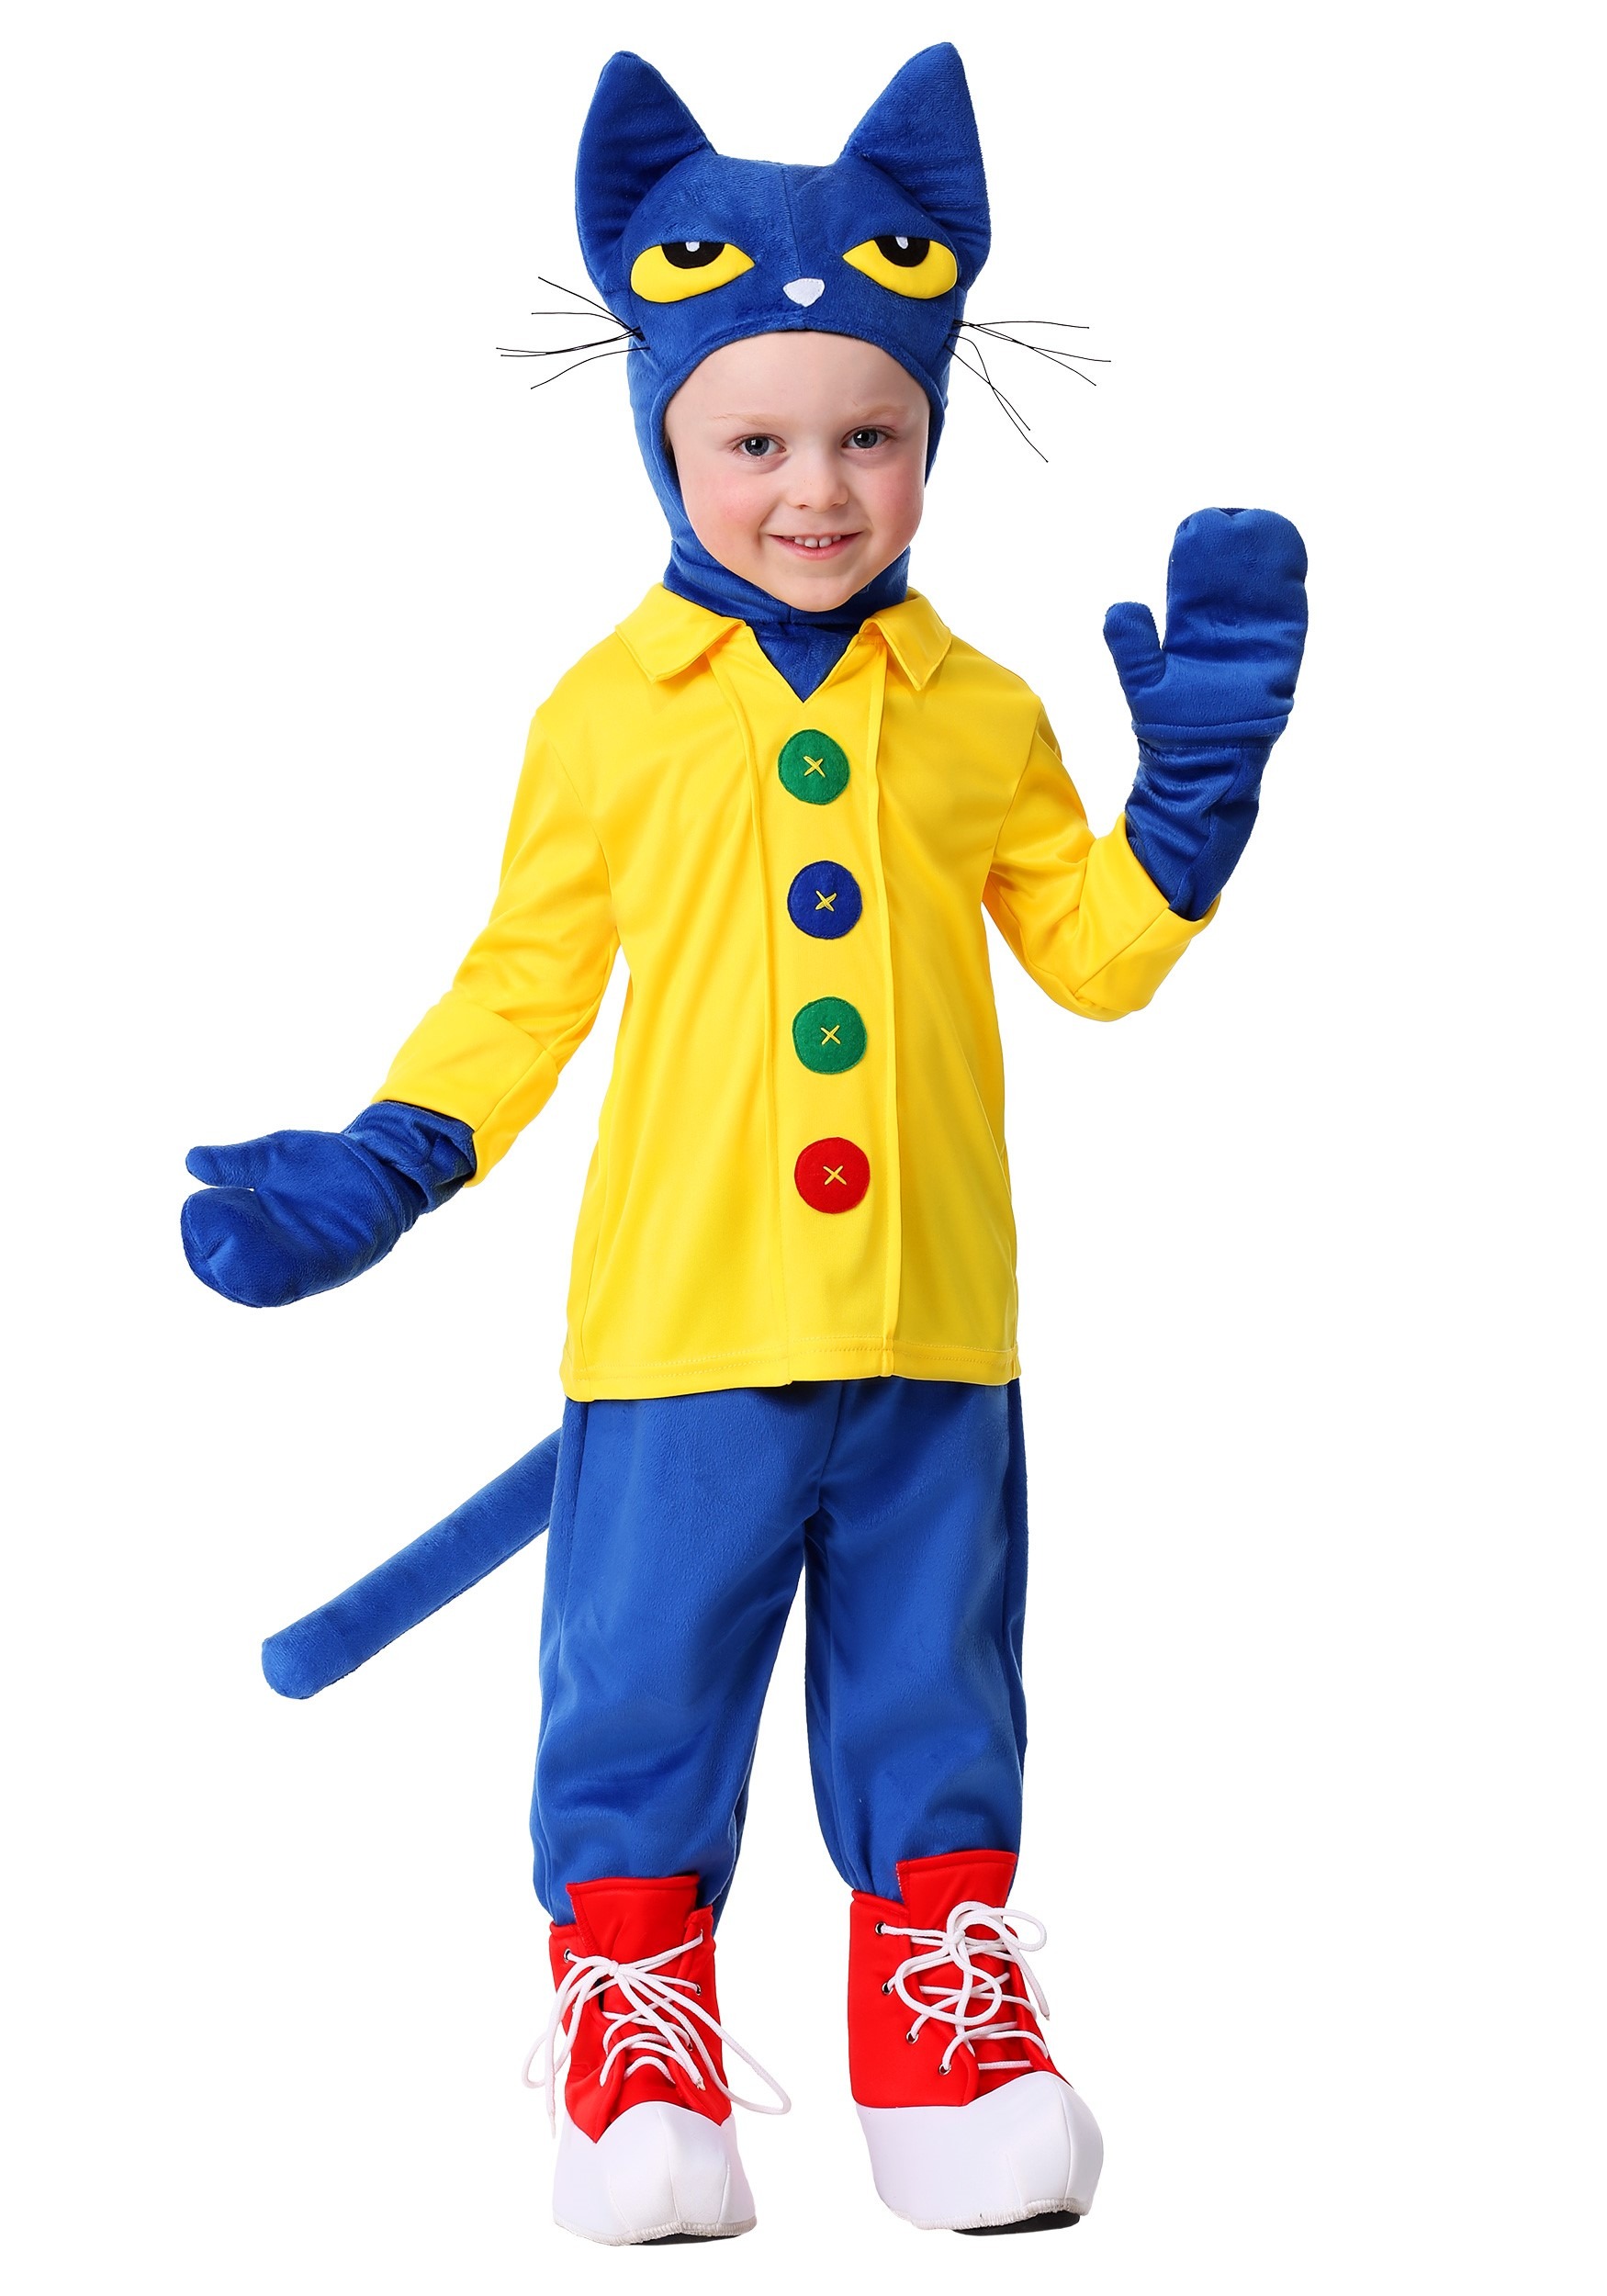 Toddler Pete the Cat Costume | Storybook Character Costume